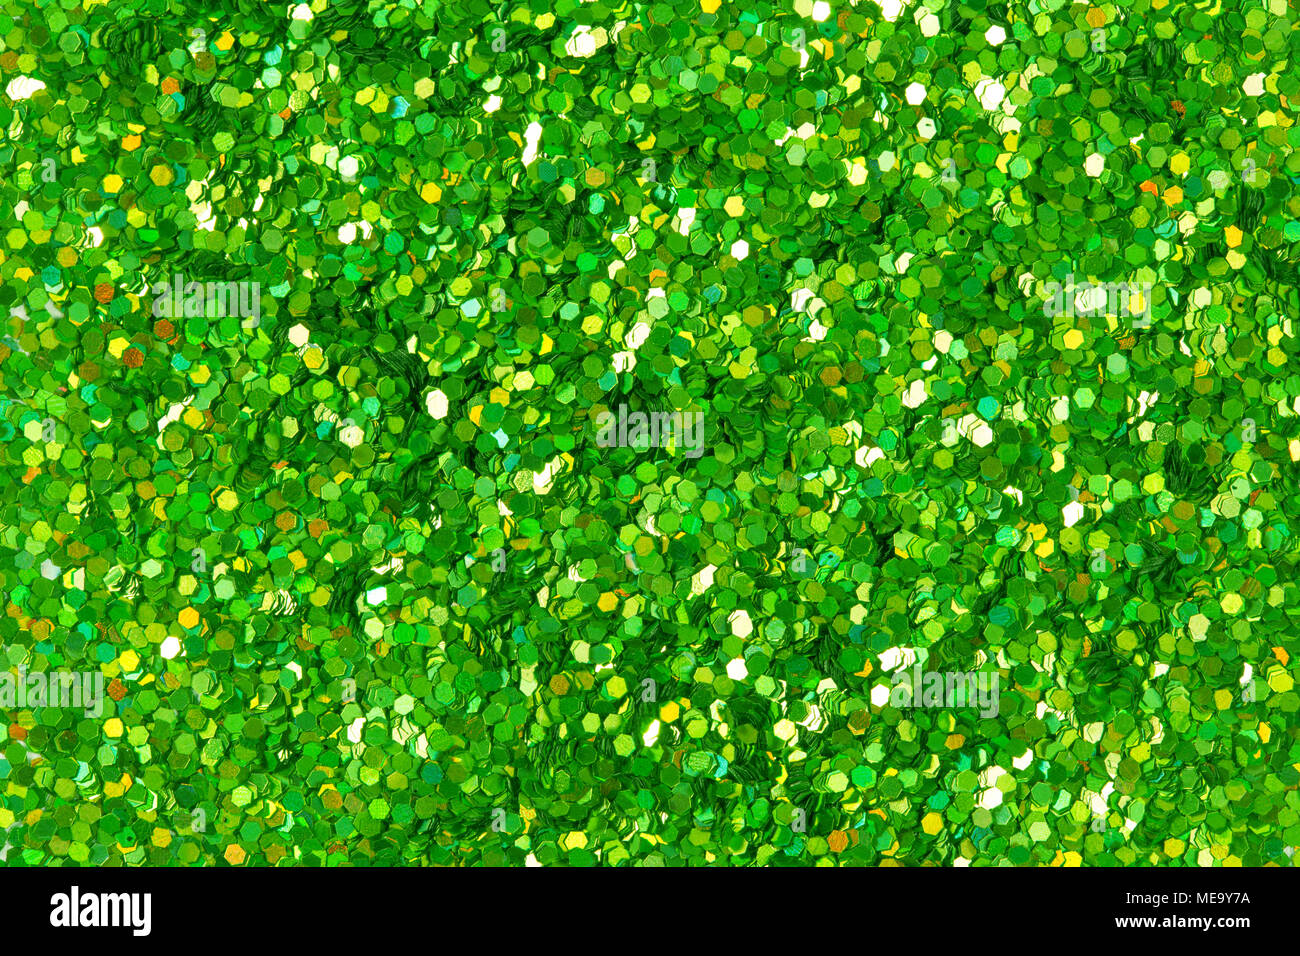 Green Glitter Backgrounds High Resolution Stock Photography And Images Alamy